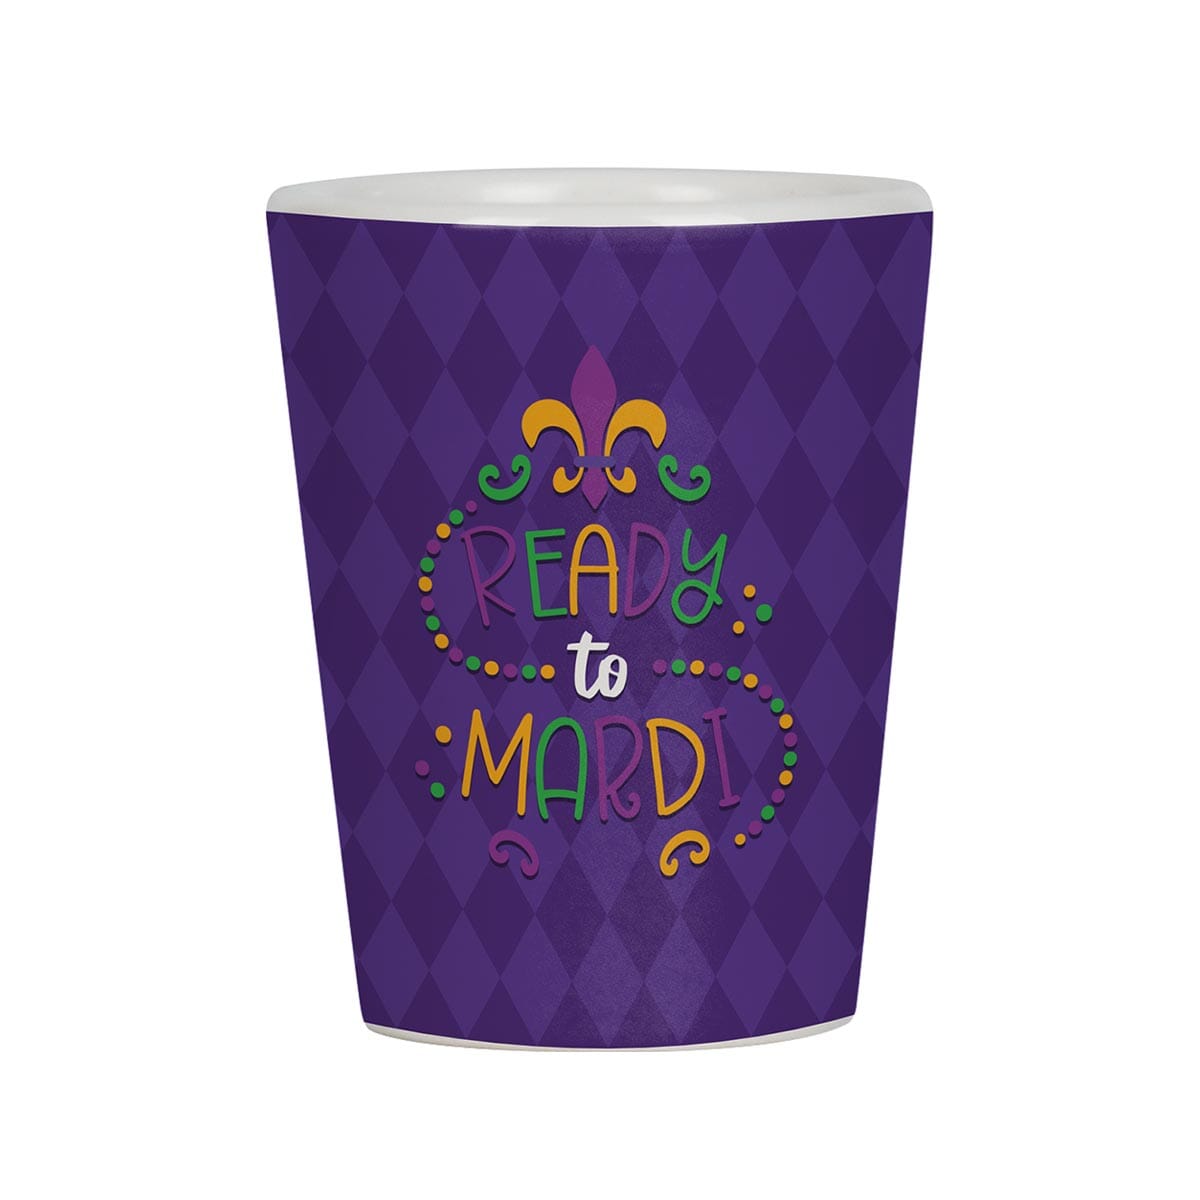 1.5 oz Full Color Collector Cup/Ceramic Shot Glass